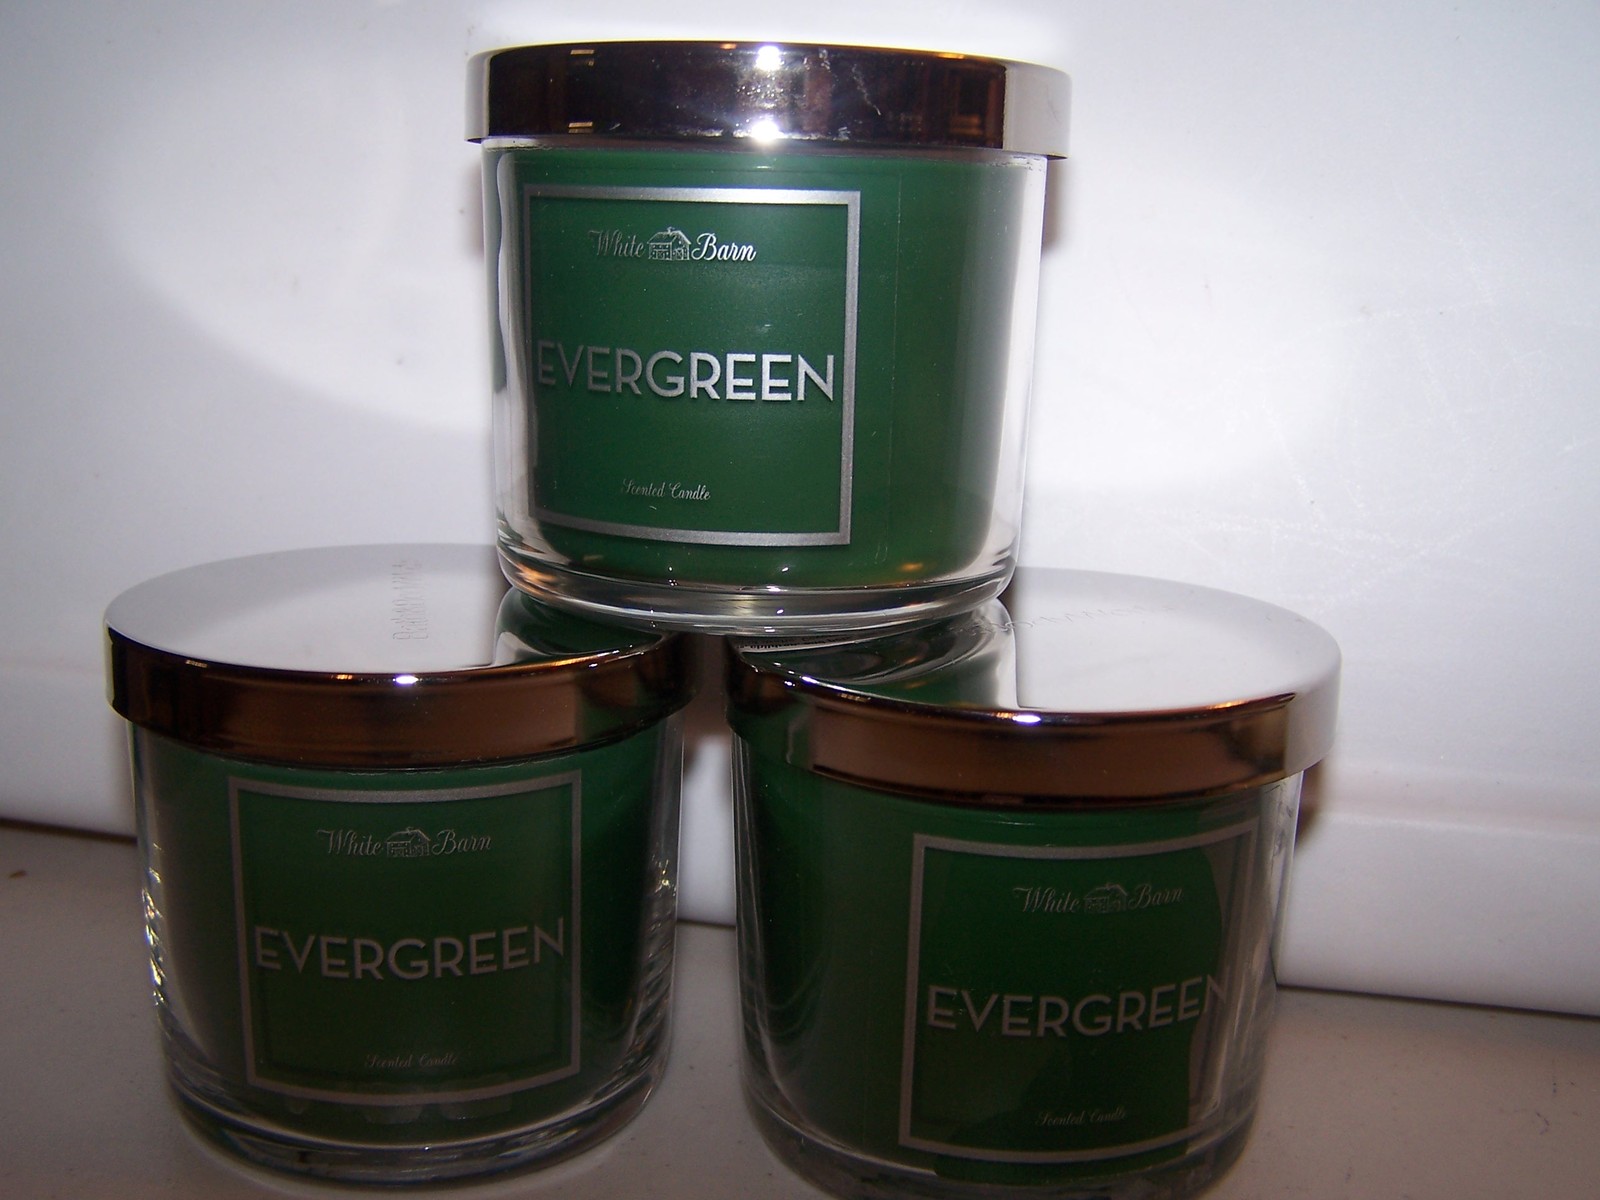 Lot of 3 White Barn Evergreen Scented Jar Candle with Lid- Limited Edition Scent - $28.99